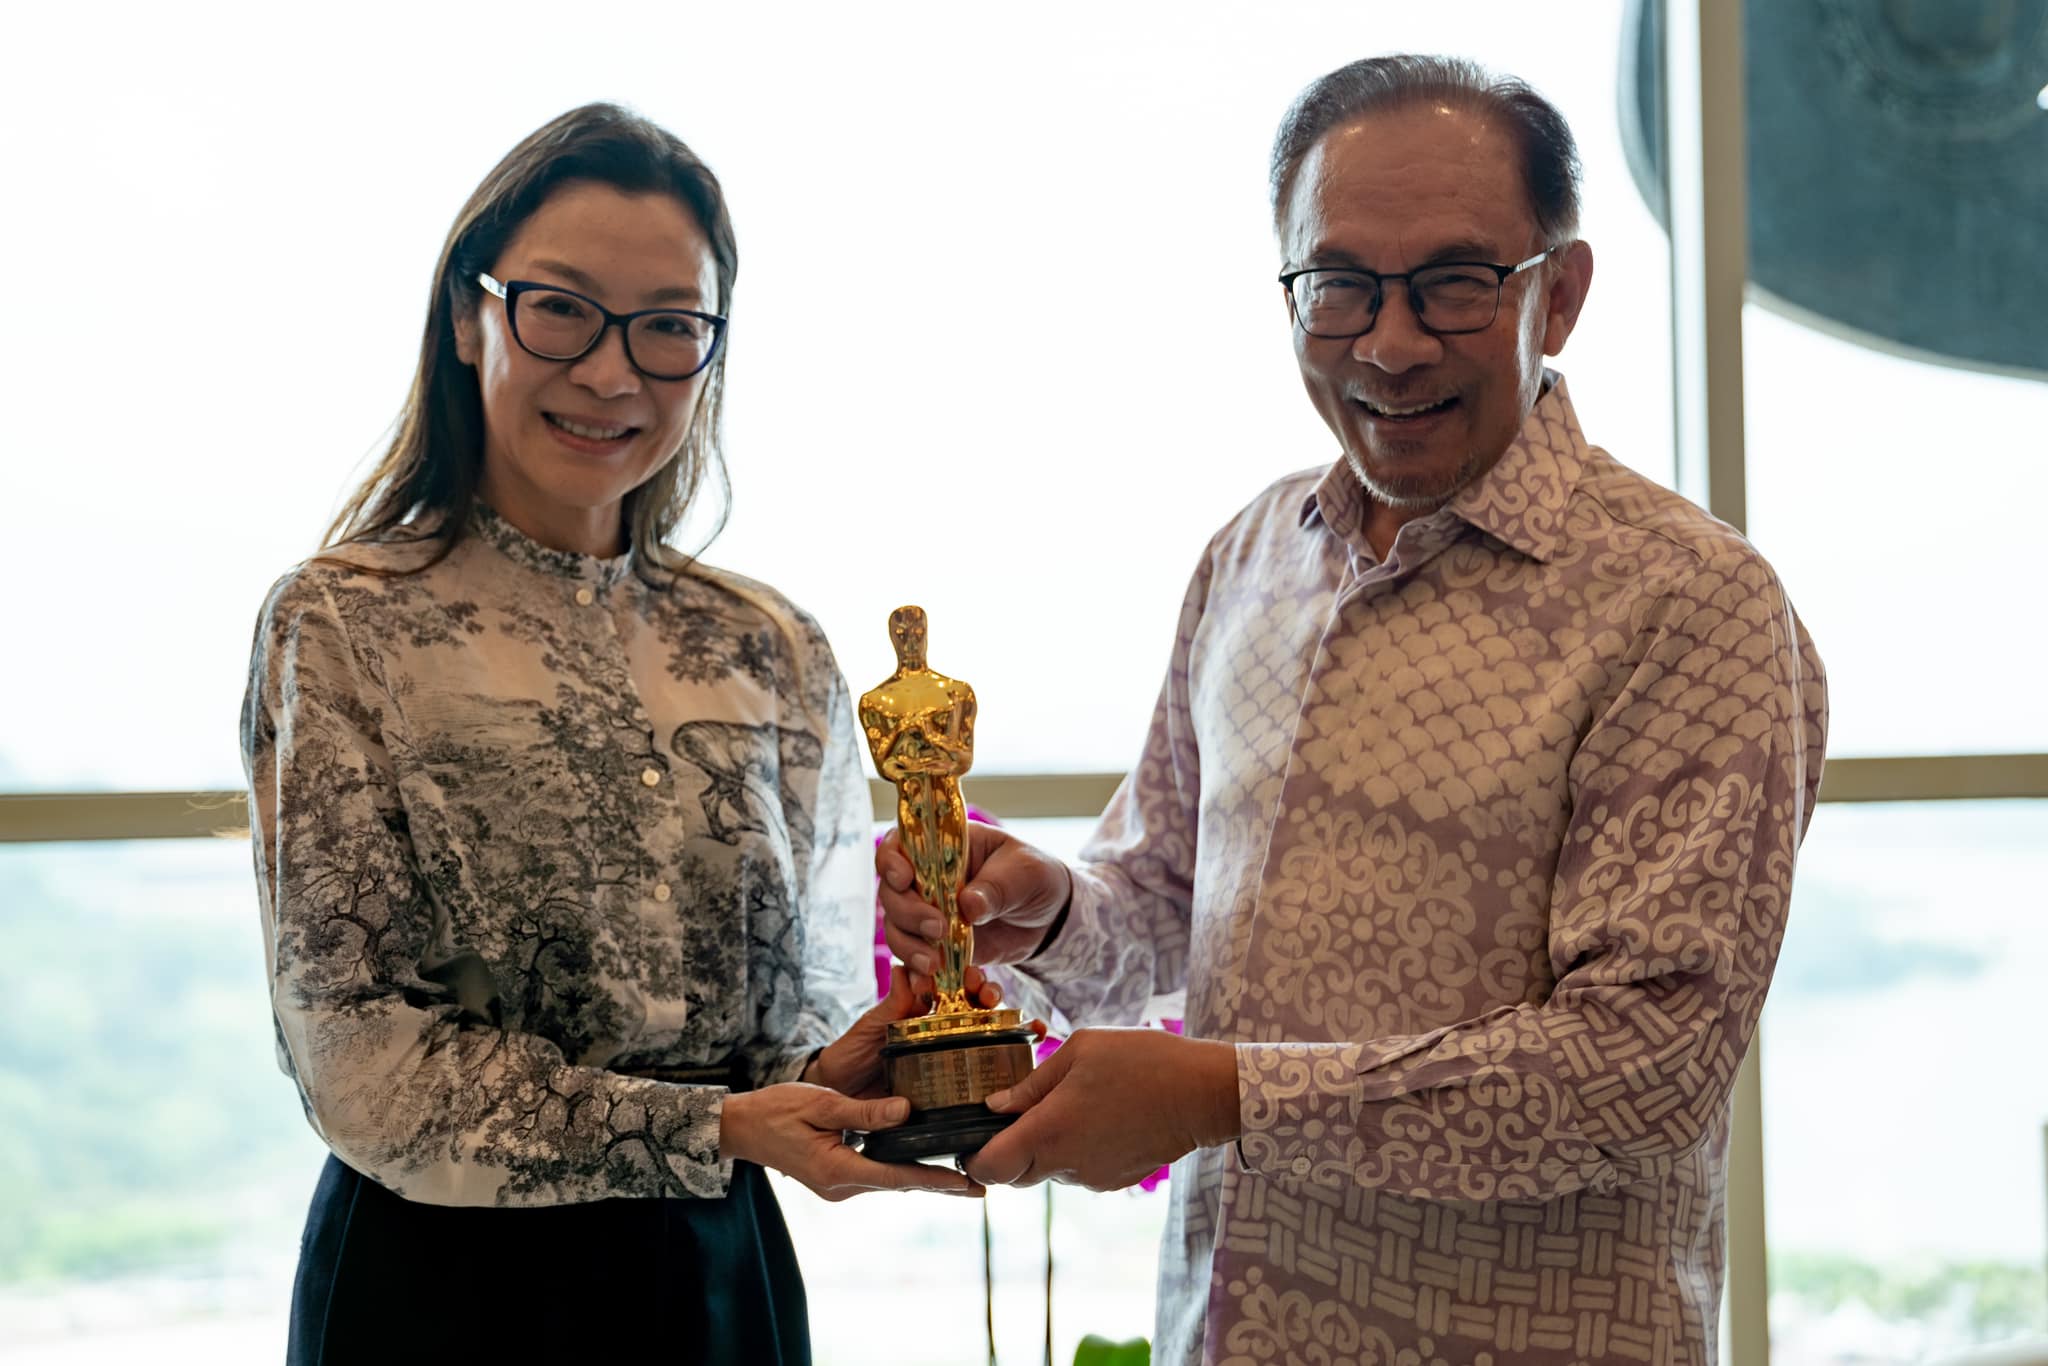 Michelle yeoh & anwar ibrahim meeting for the first time in regards to her big win for oscar 2023